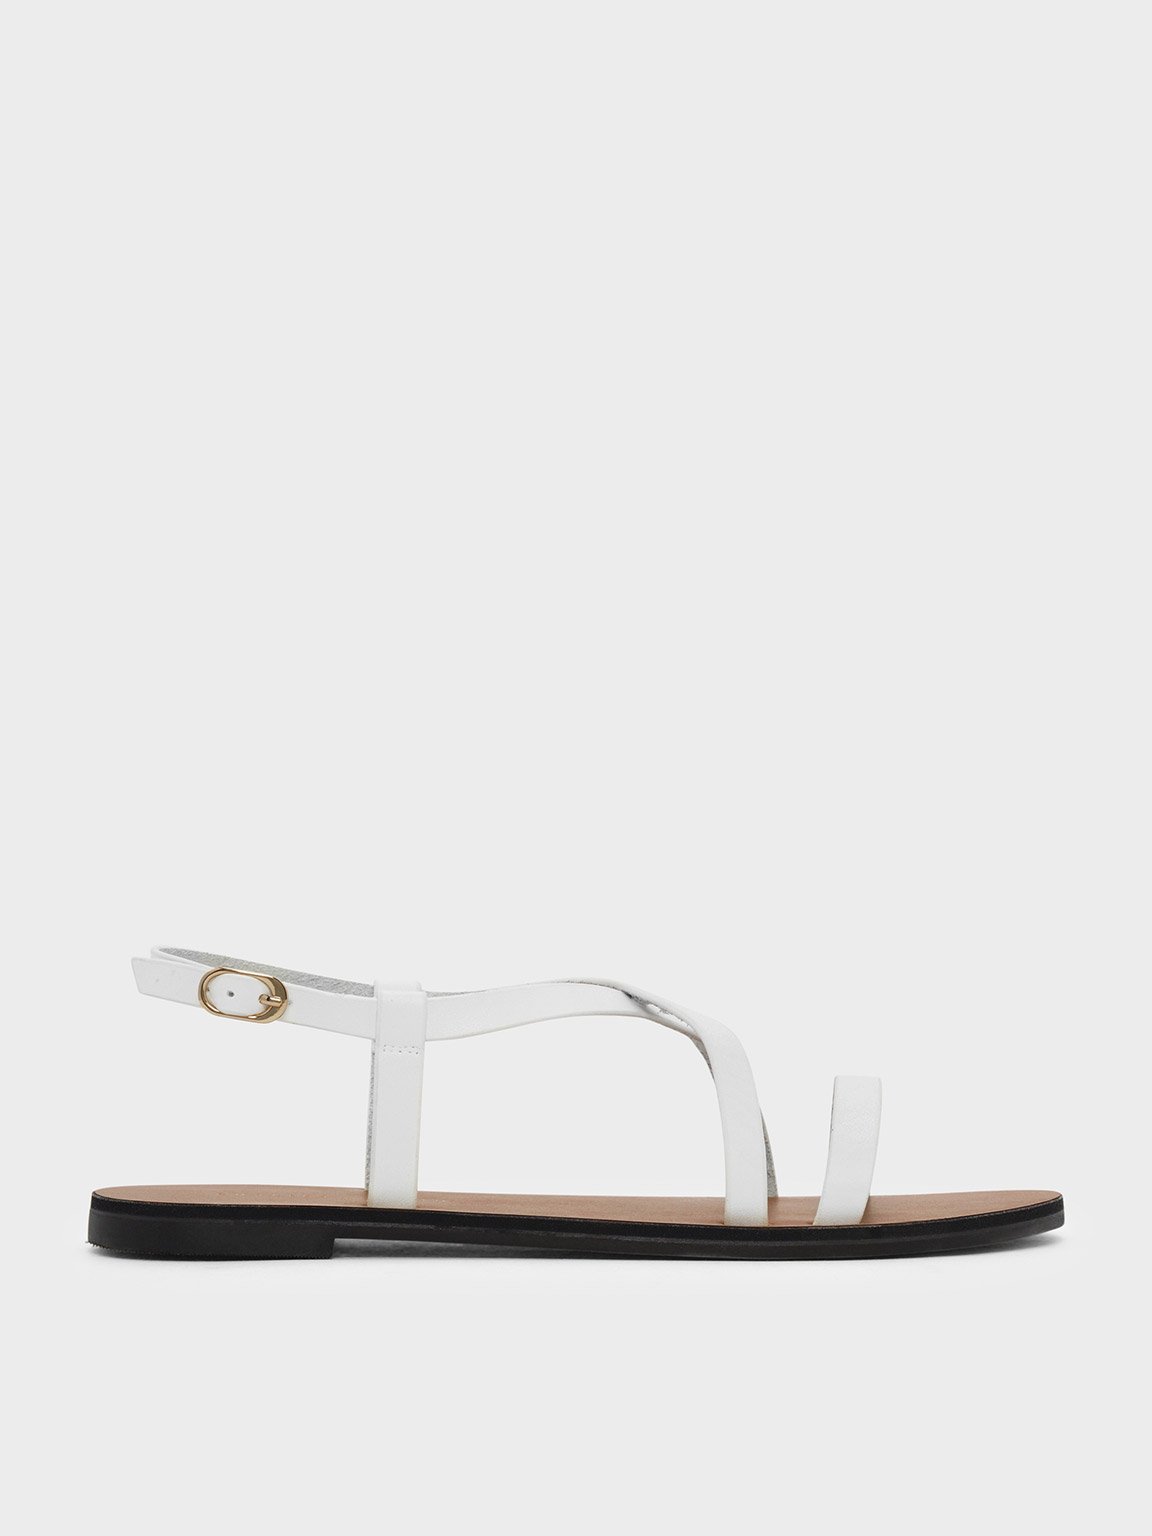 White Criss Cross Sandals - CHARLES & KEITH SG